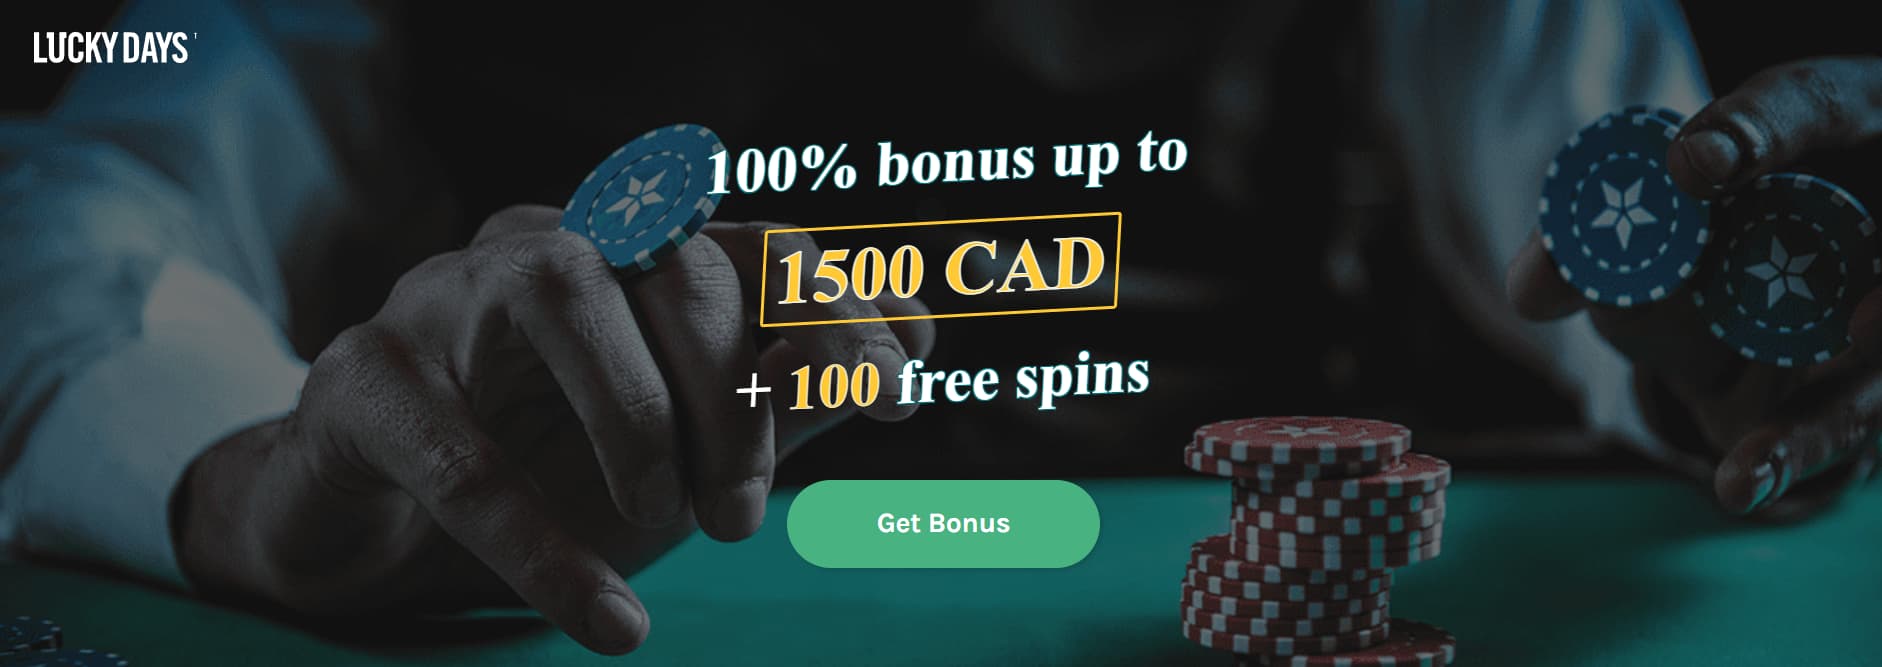 lucky days casino review